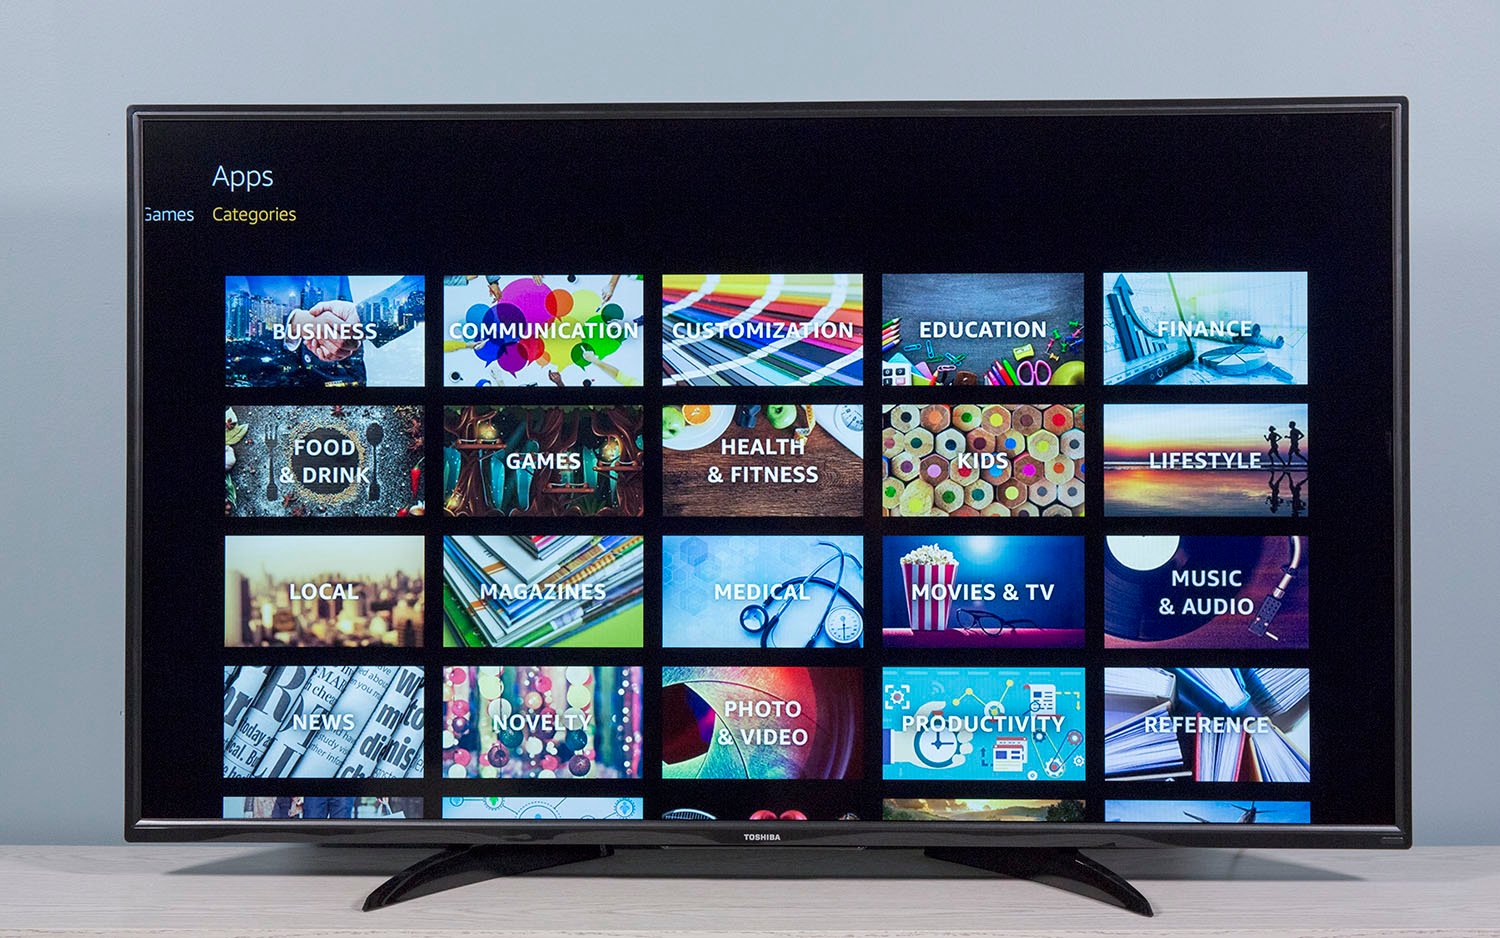 Latest Technology Televisions: 4k Picture, HD Sound, Wifi & Many More